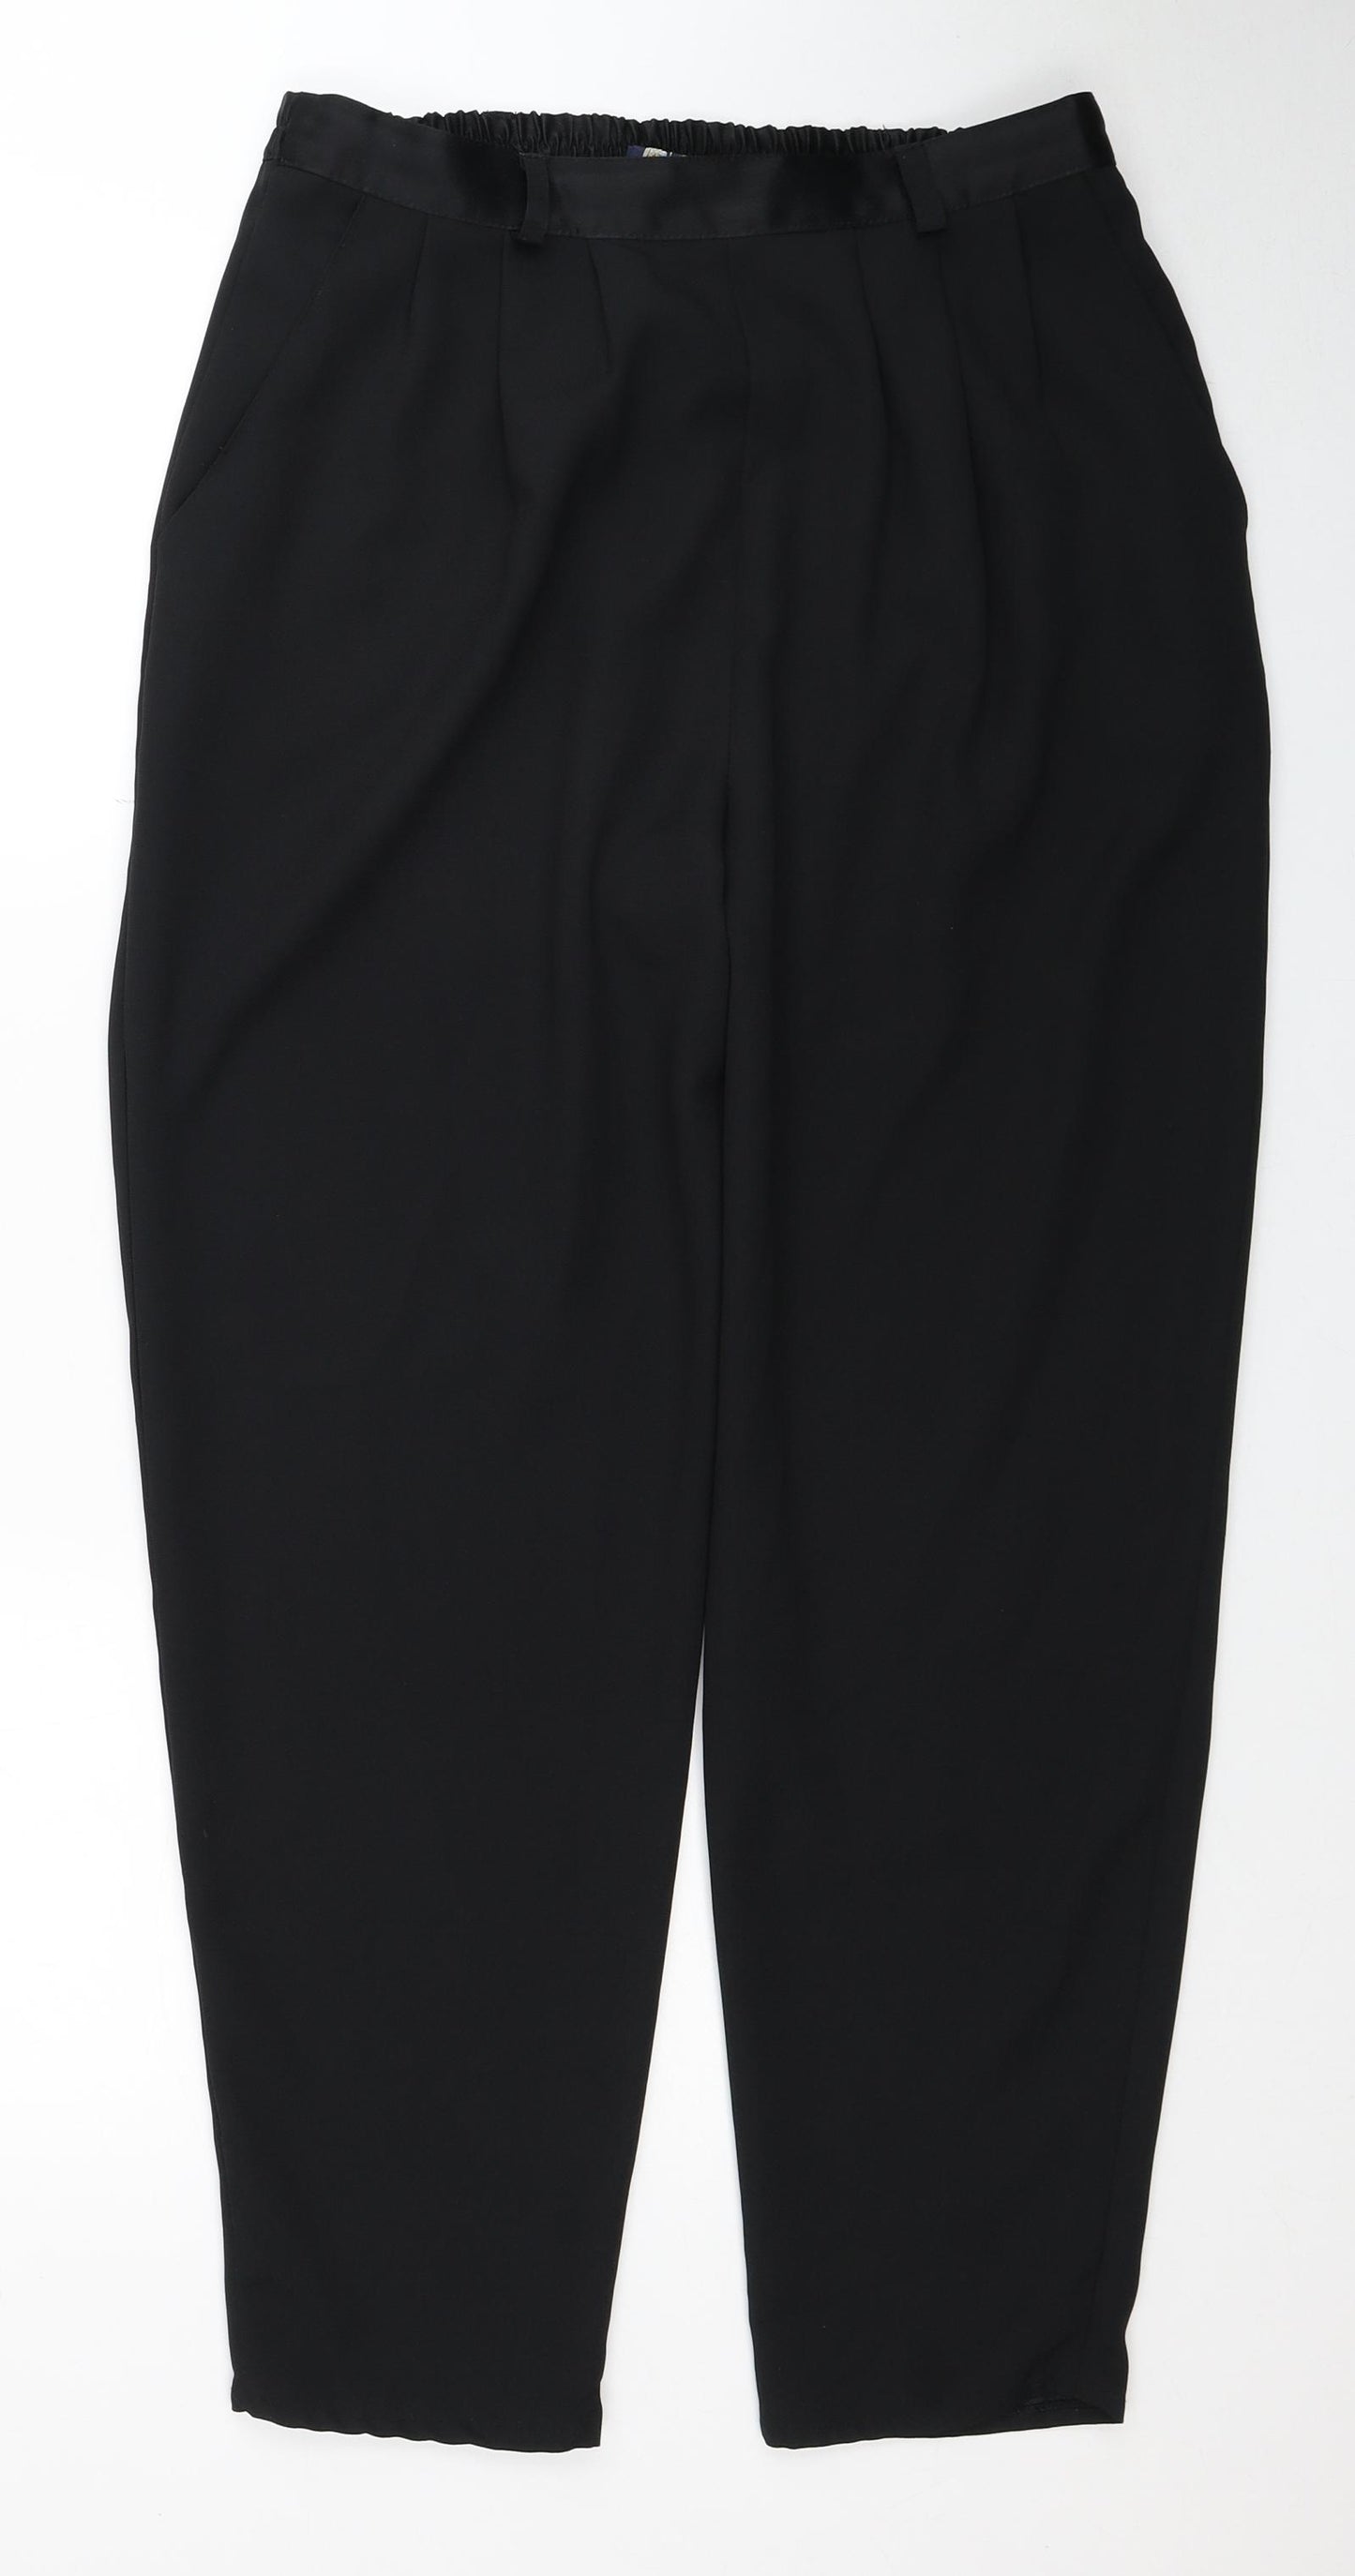 Your Sixth Sense Womens Black Polyester Trousers Size 14 Regular